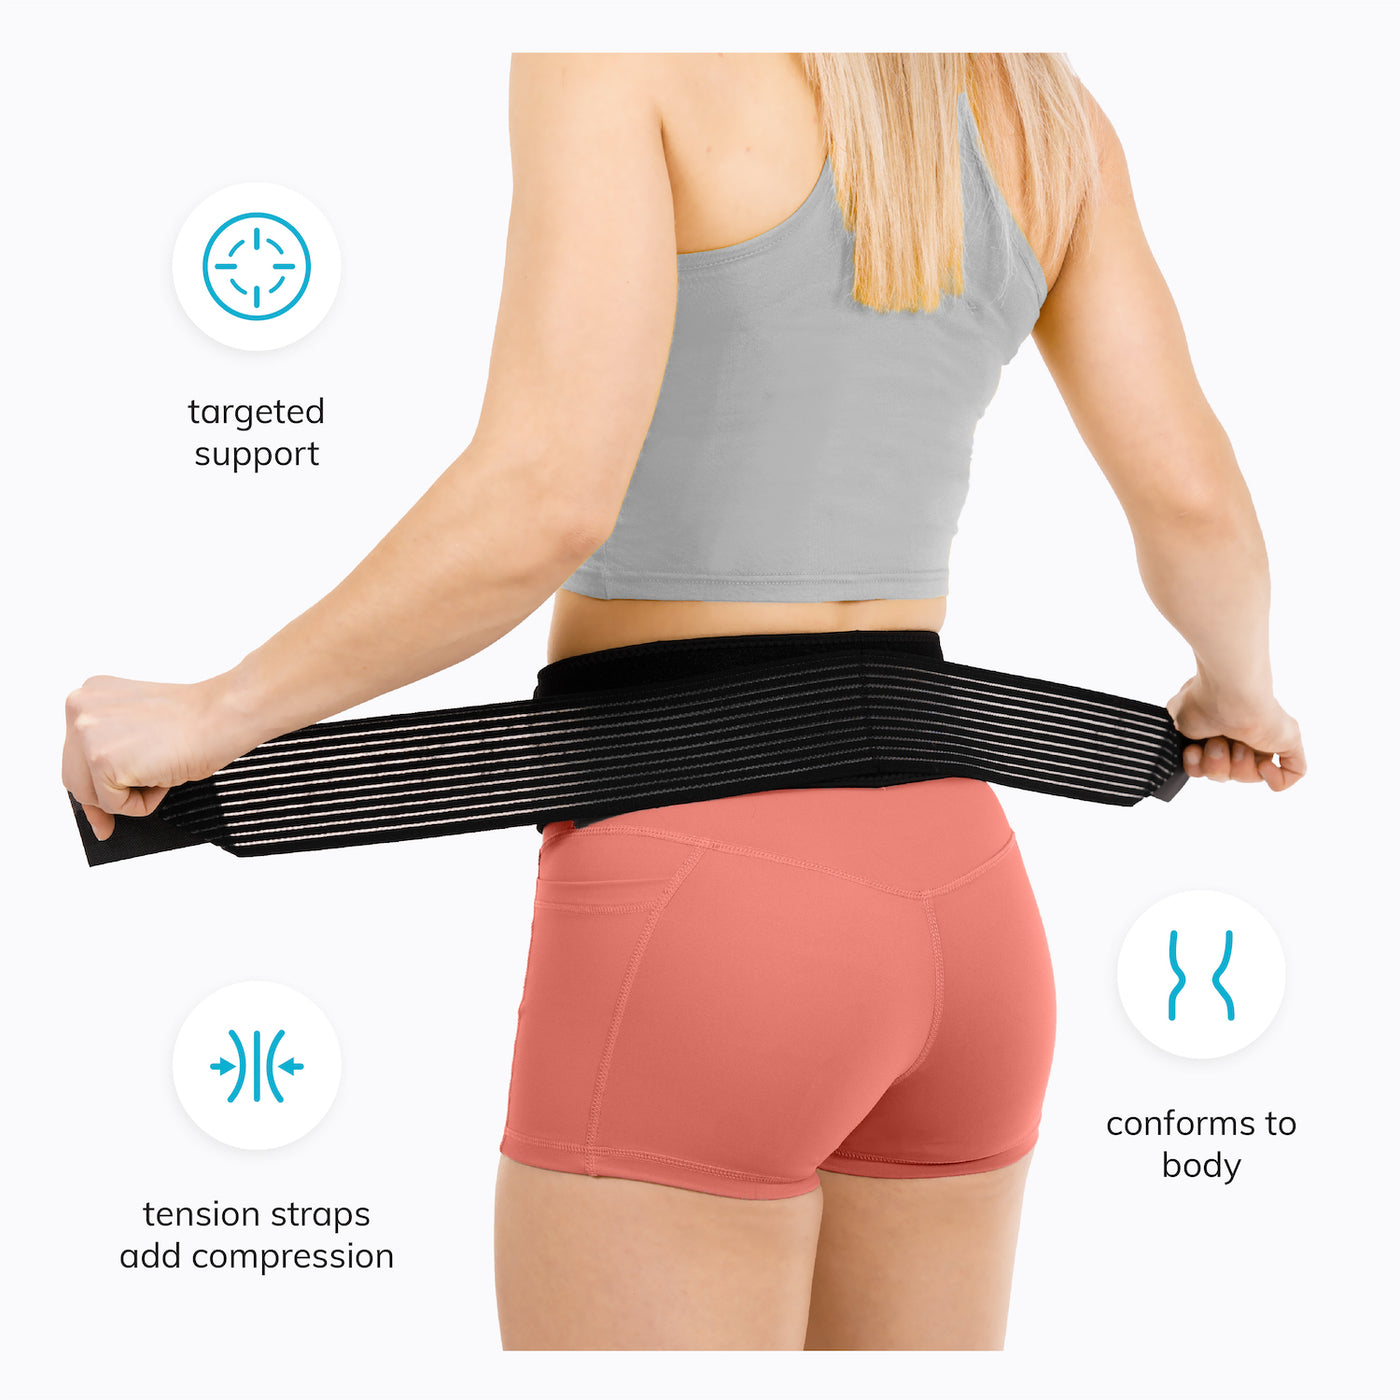 The lower crossed syndrome support brace applies target support to the hip flexors